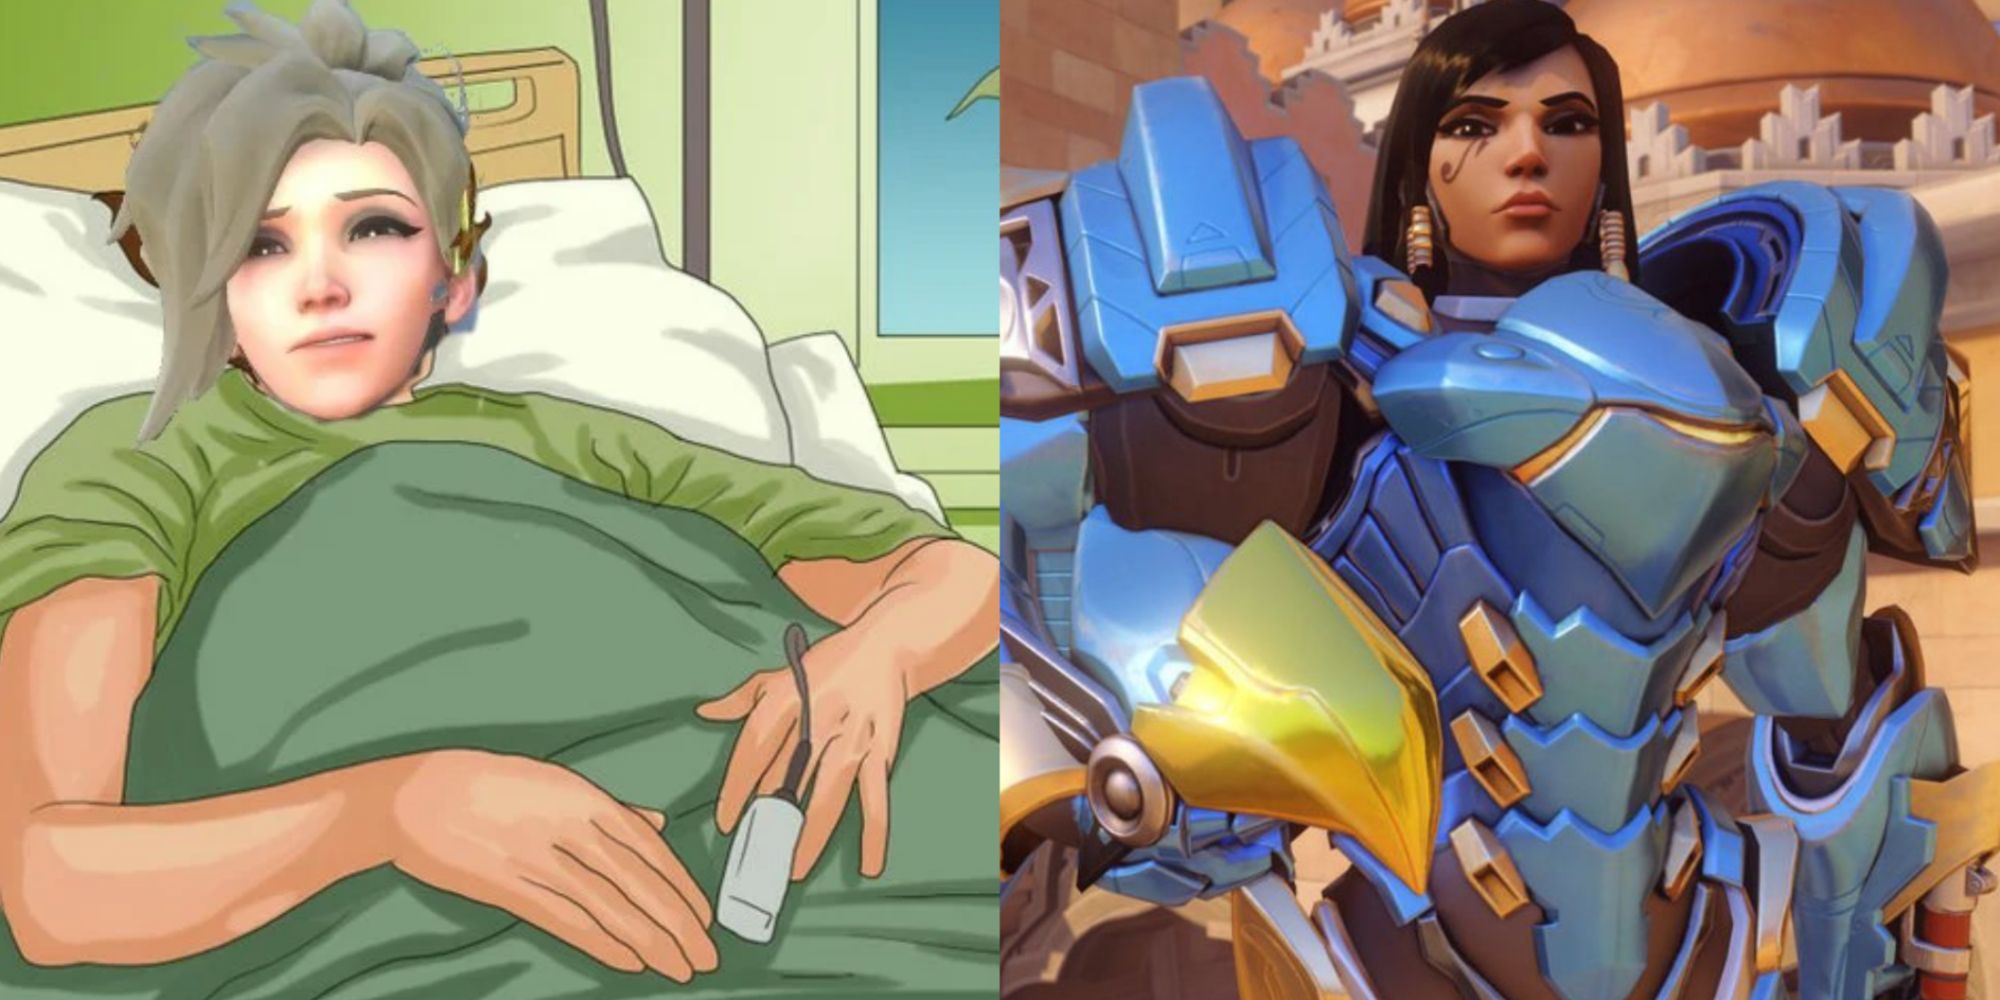 A split image of Pharah and Mercy from Overwatch